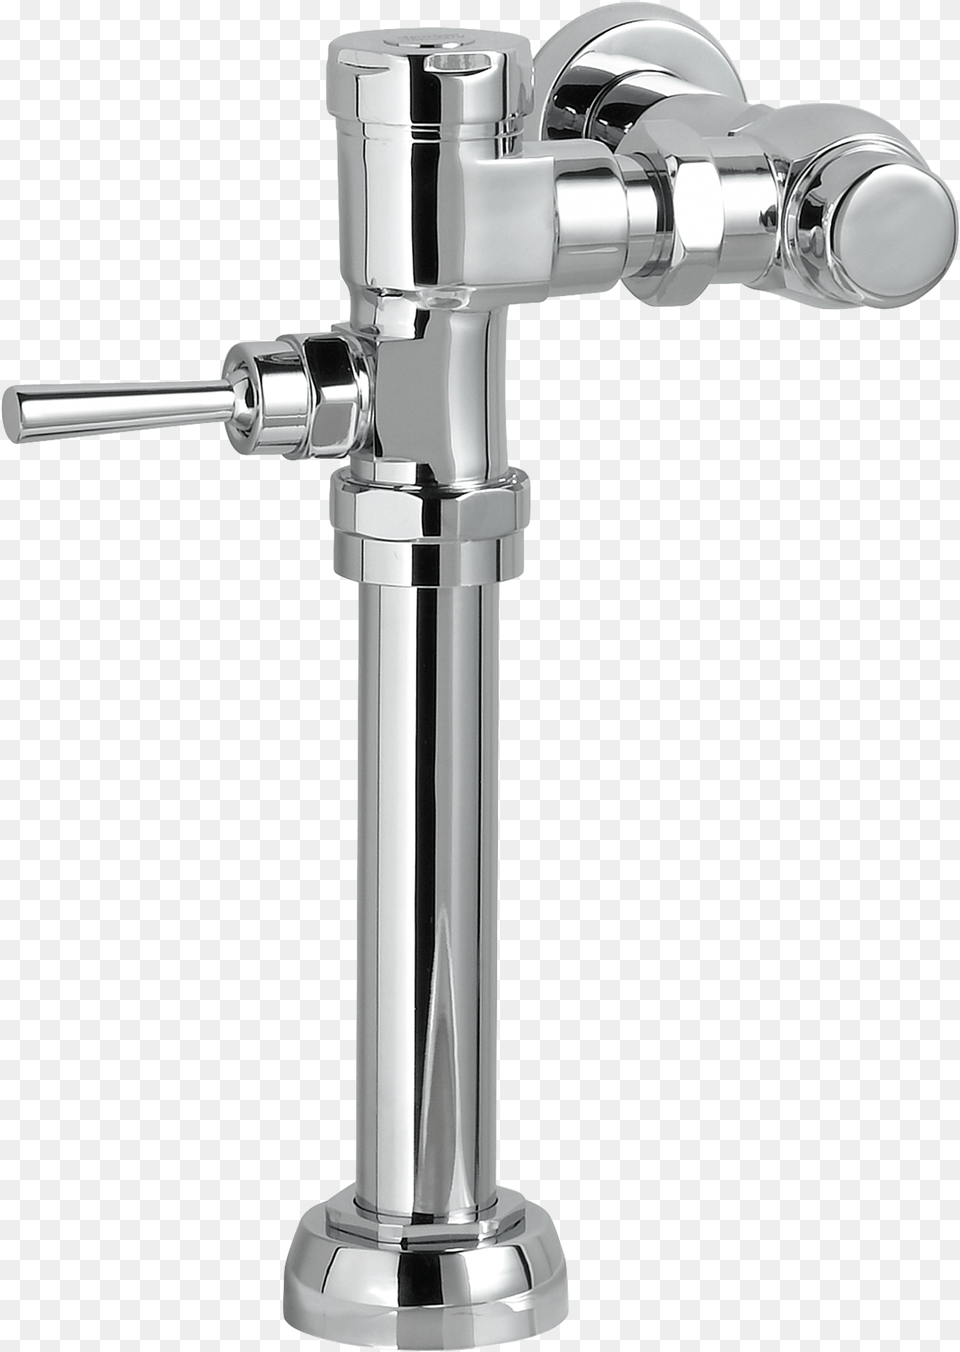 Flush Valve For 27quot Supply Cl To Top Of Bowl Different Kinds Of Toilet Flush, Sink, Sink Faucet, Tap, Bathroom Png Image